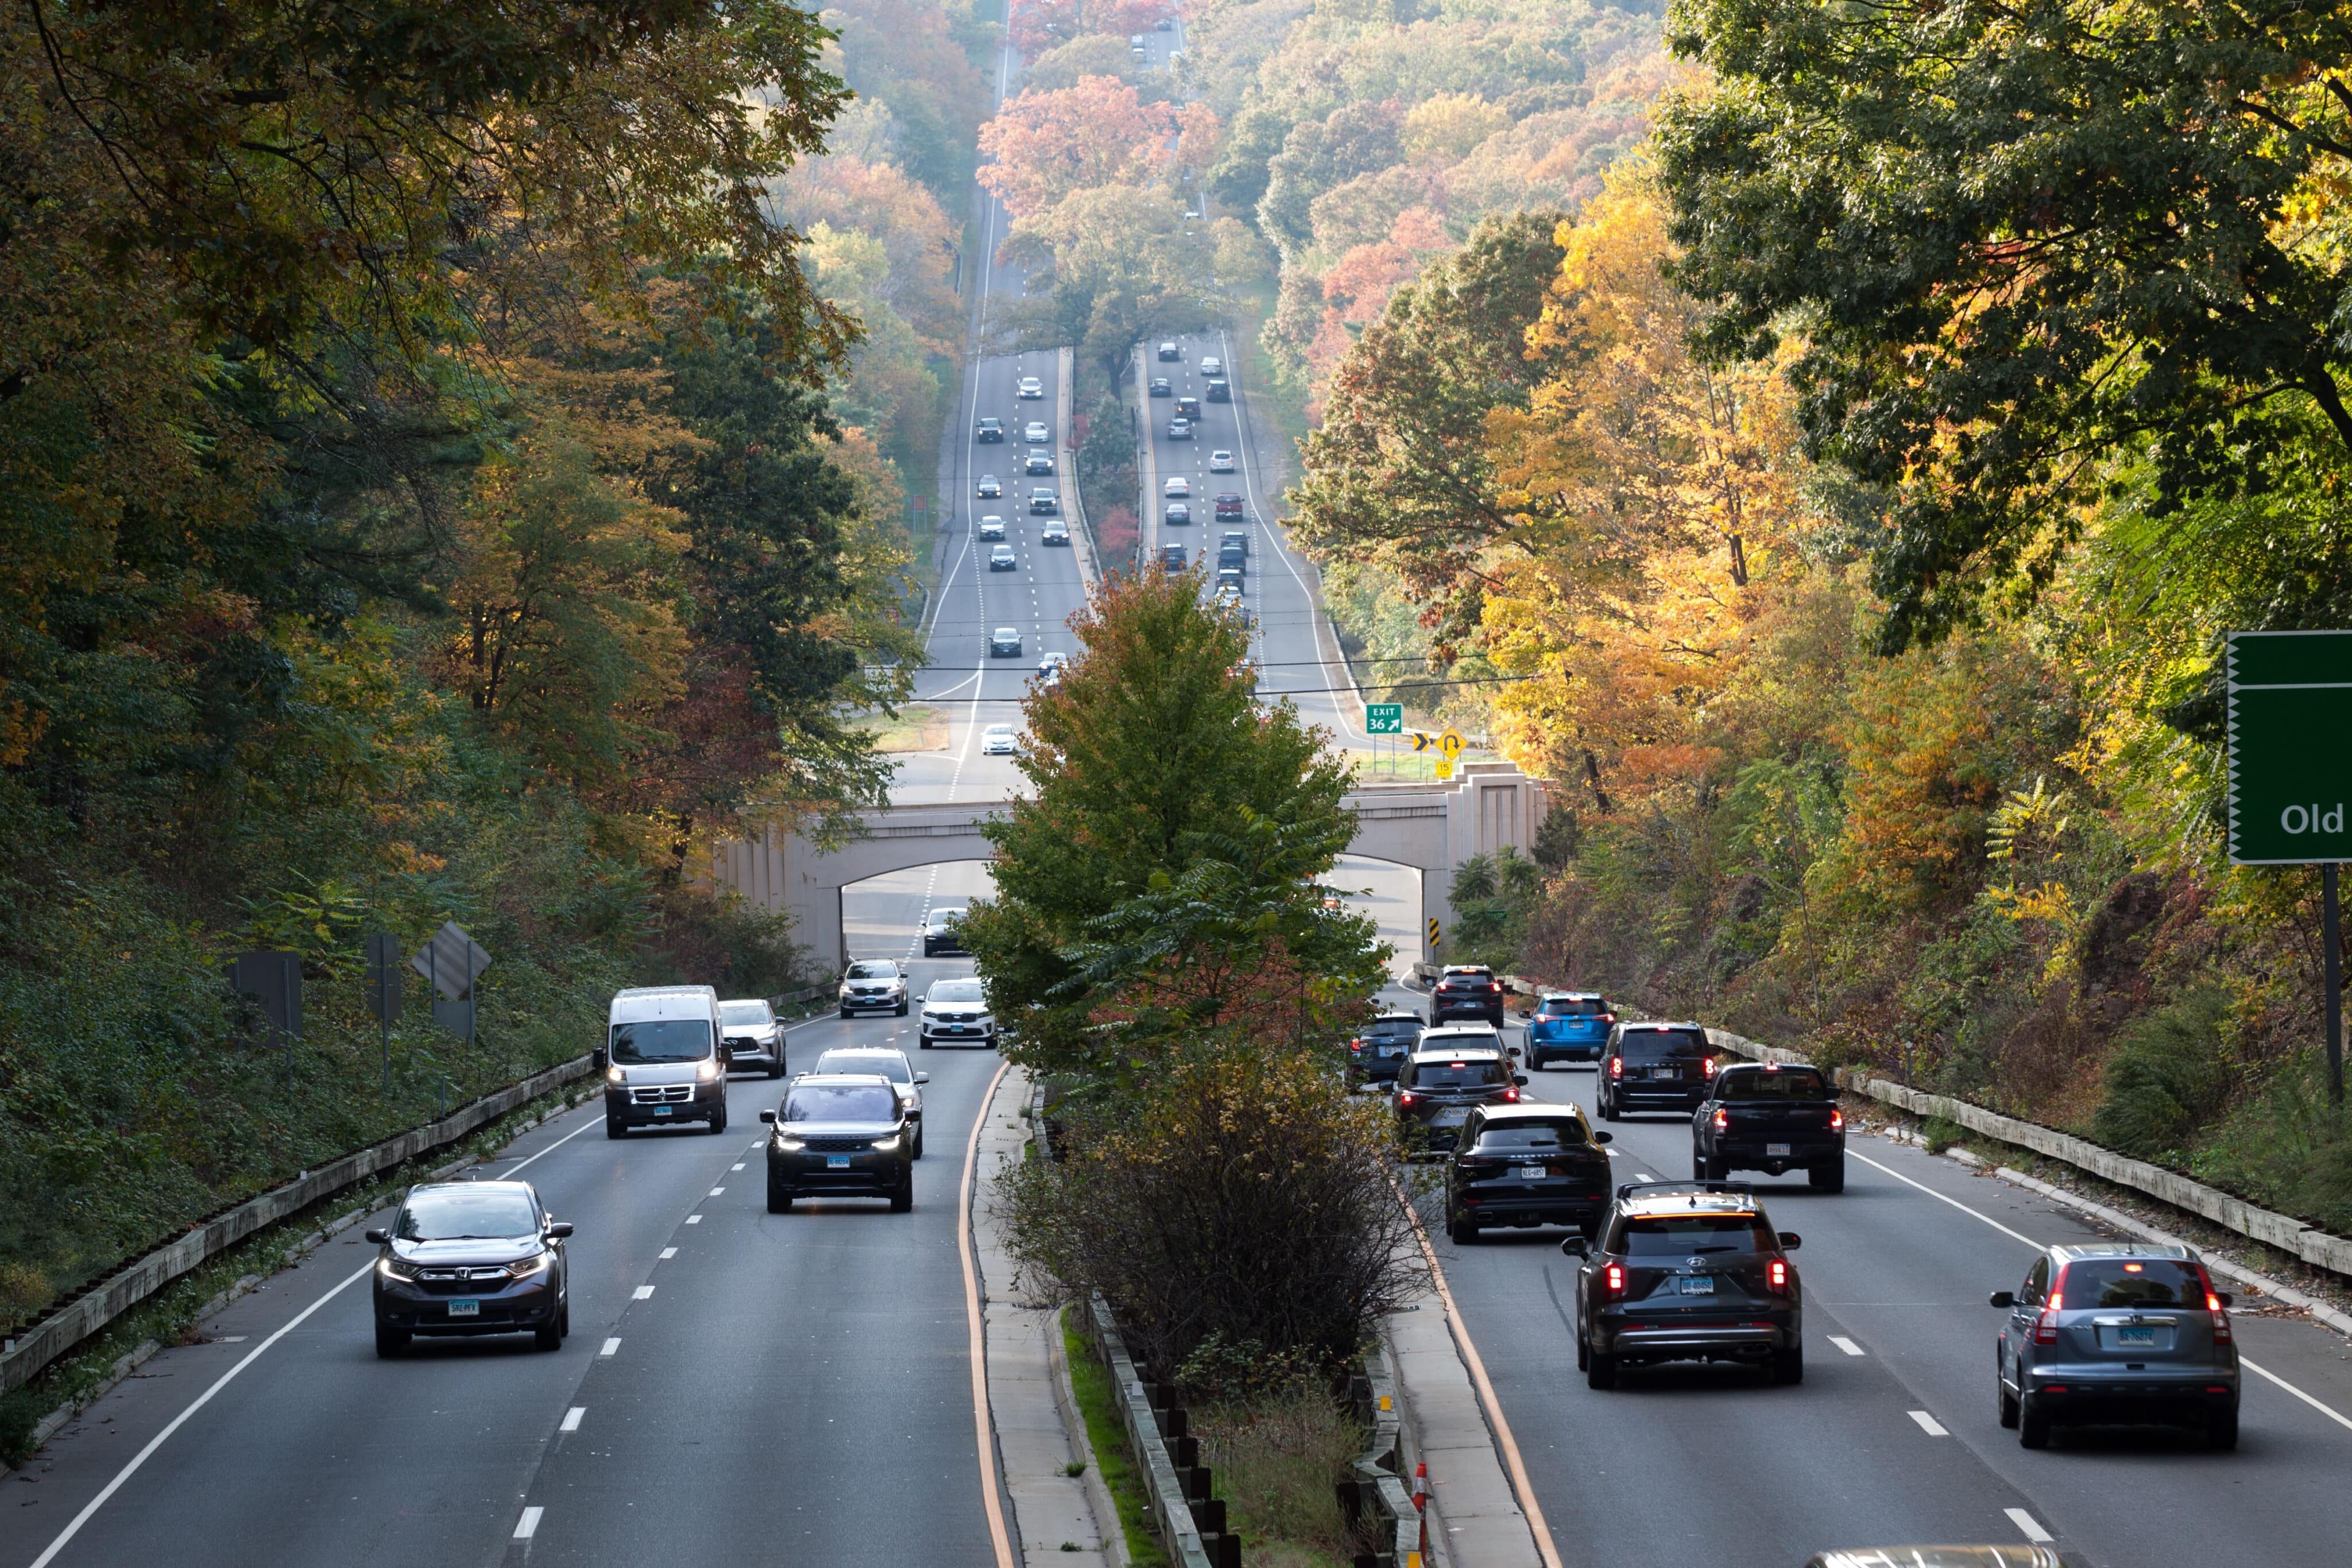 New Canaan, CT, USA - October 22, 2022: Daytime traffic on the interstate highway in New Canaan Connecticut.